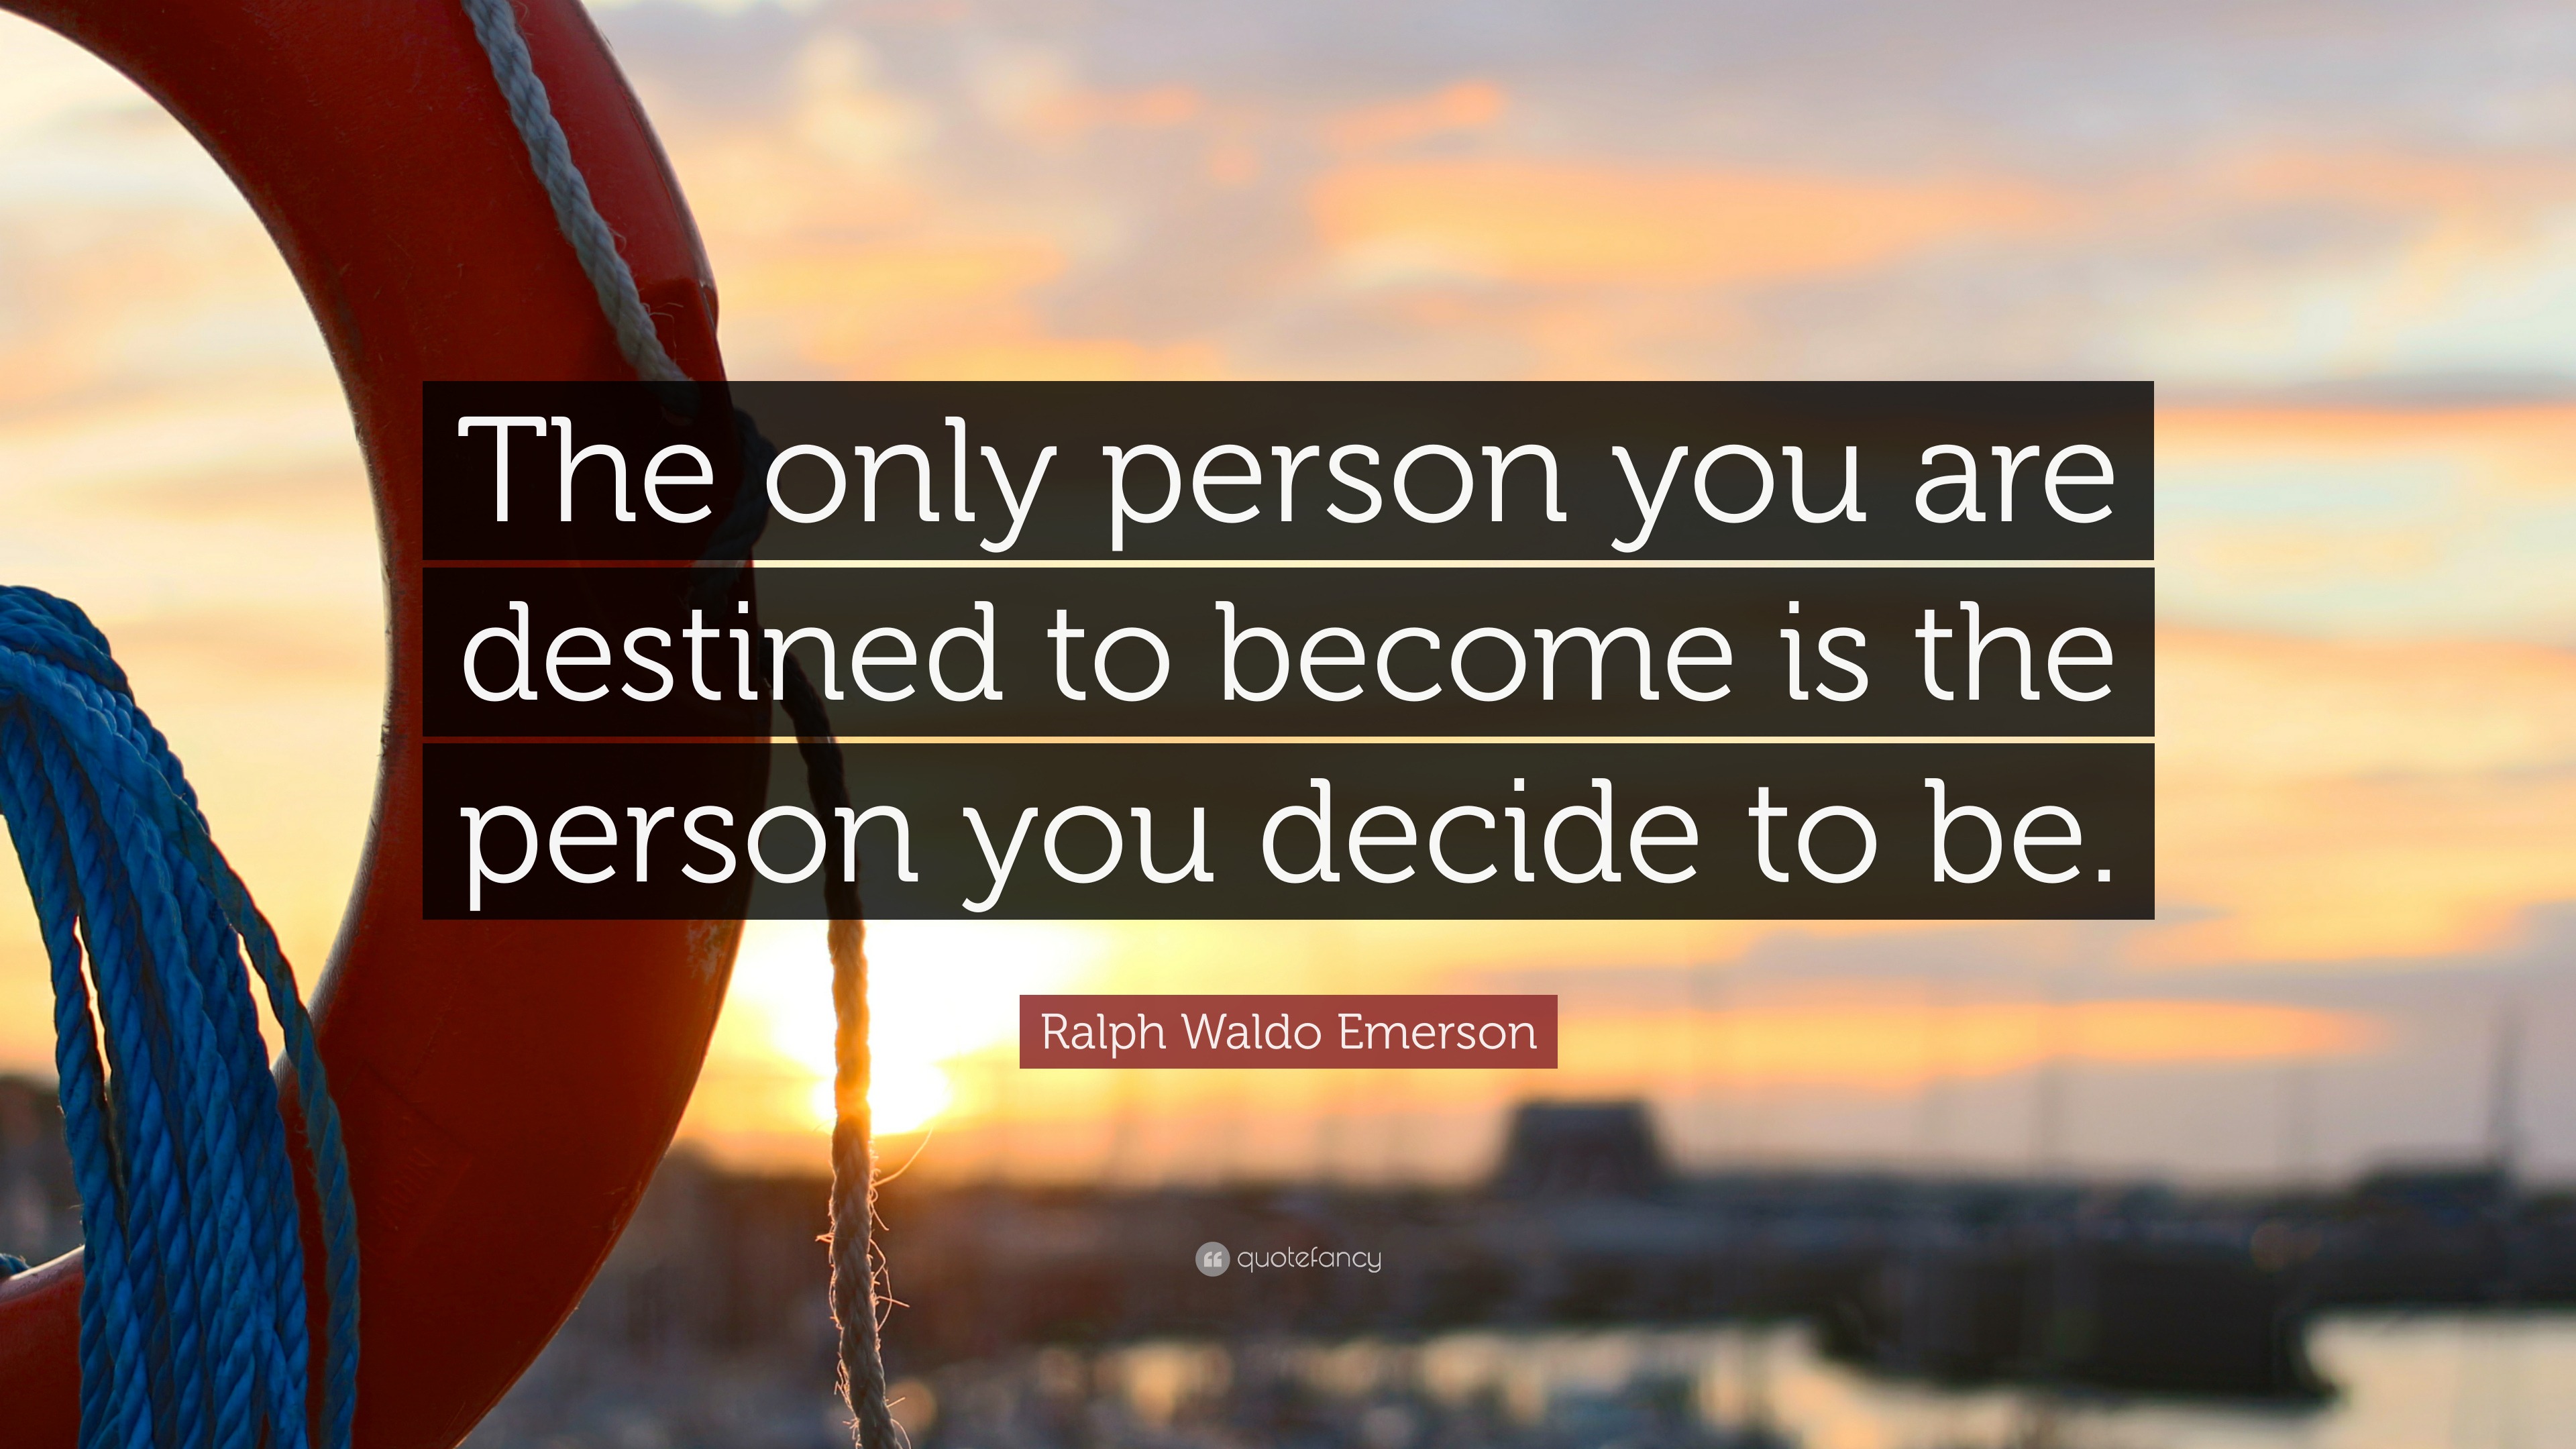 Ralph Waldo Emerson Quote: “The only person you are destined to become